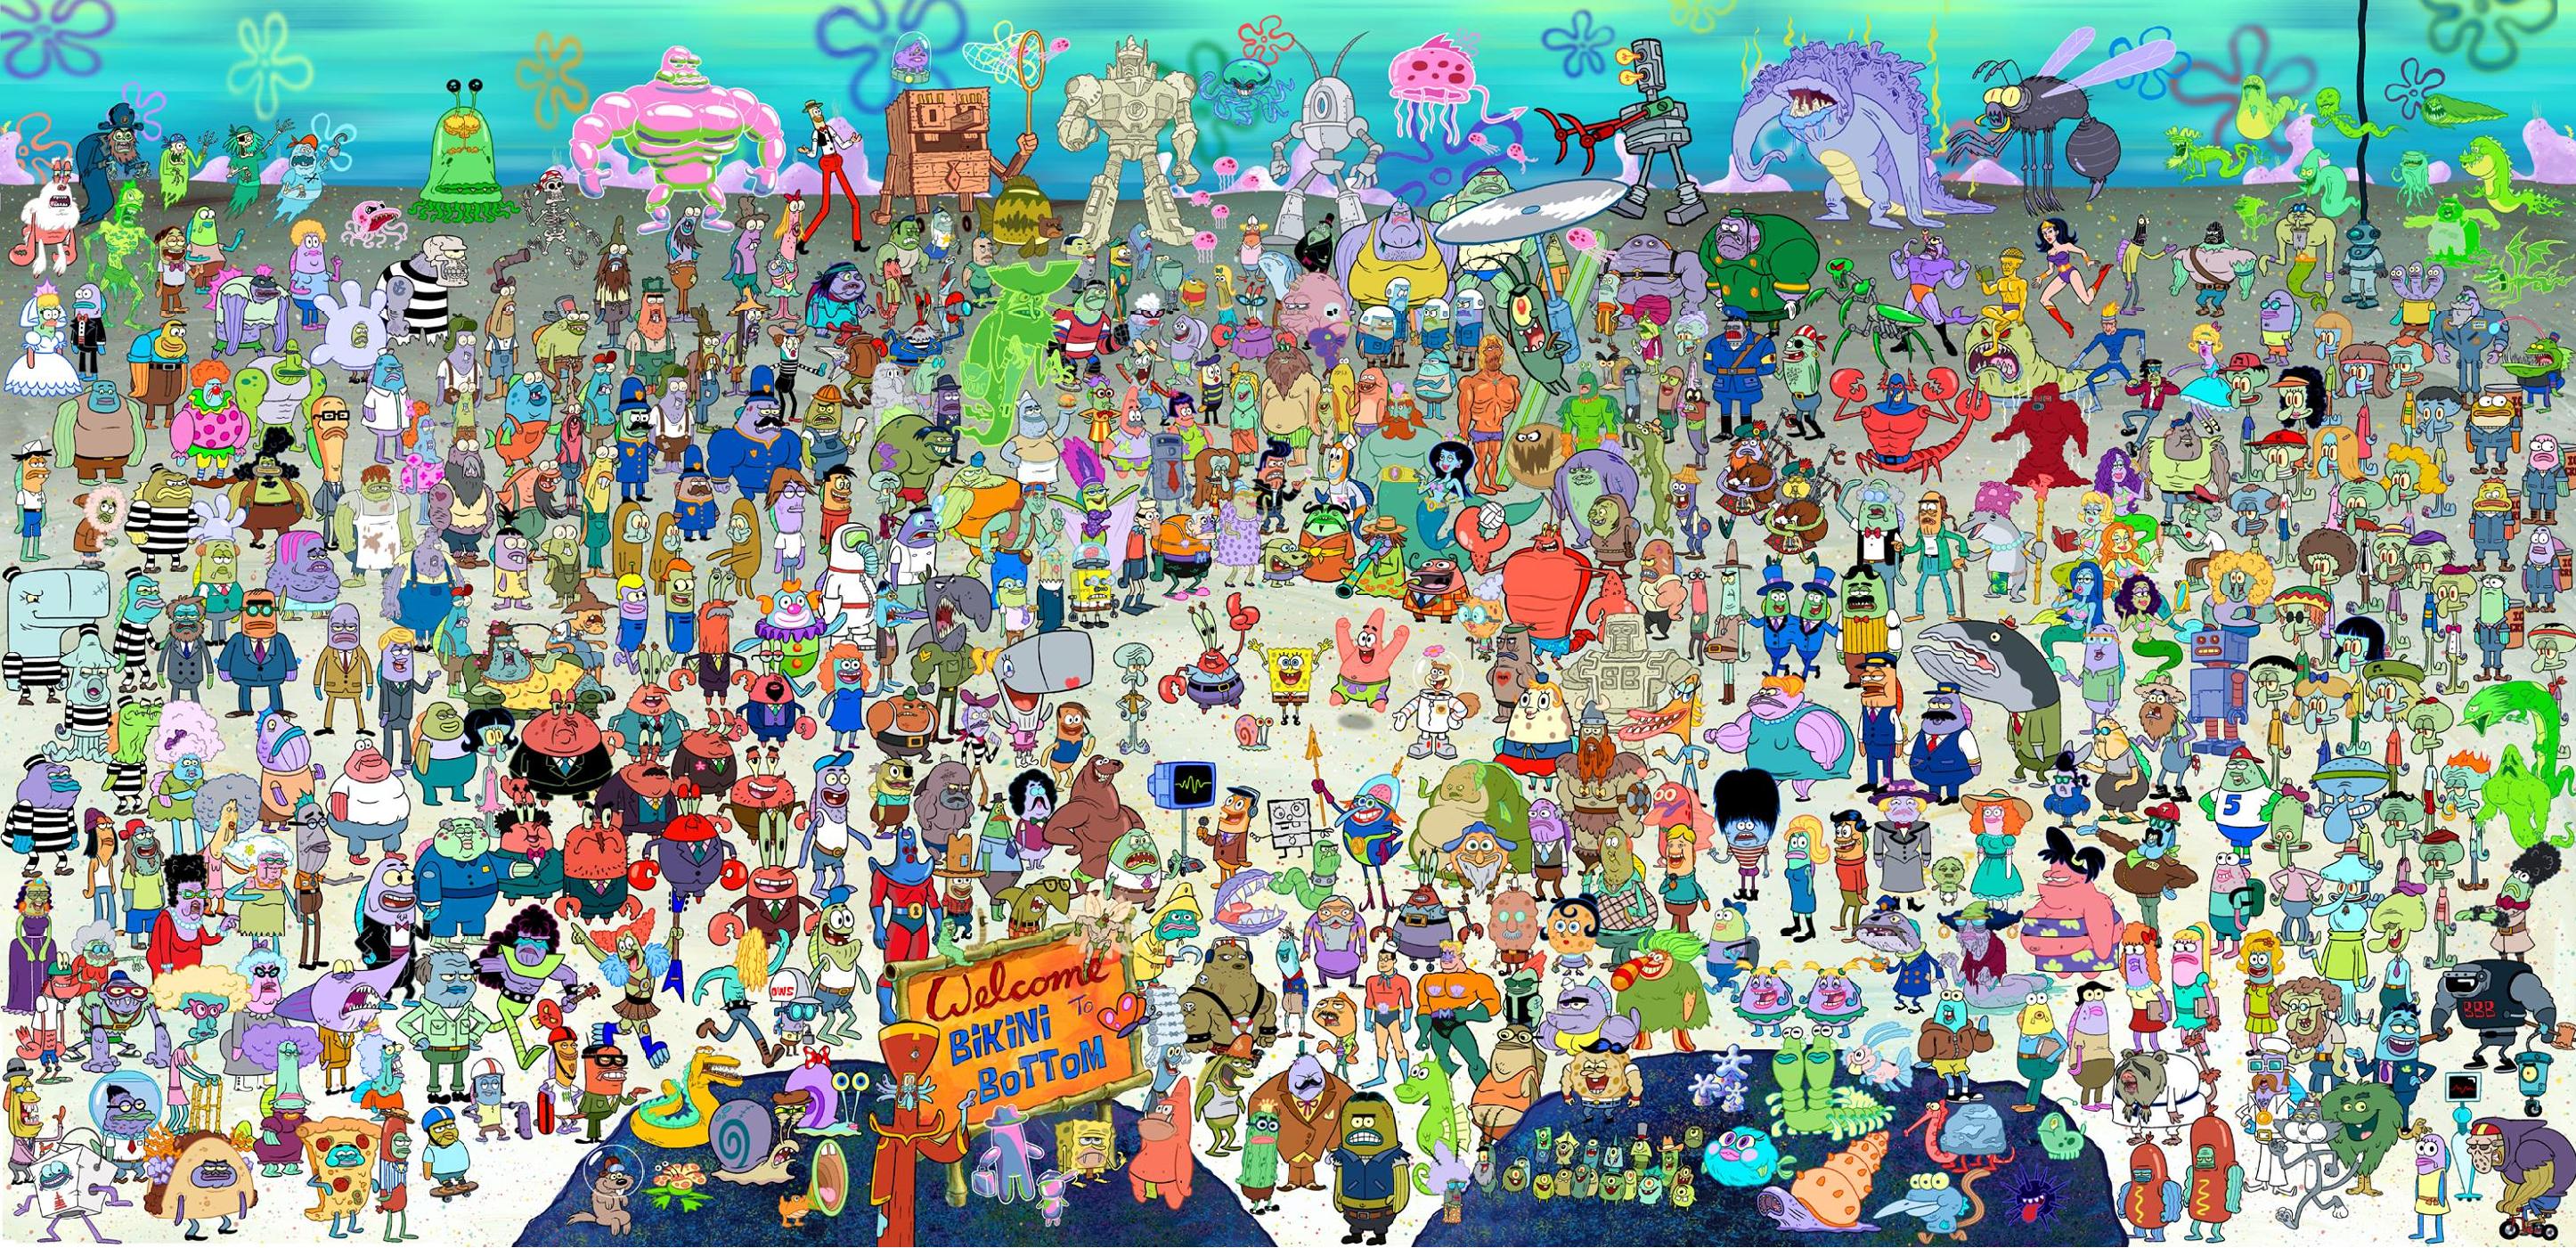 A higher resolution of the Every Spongebob Character wallpaper